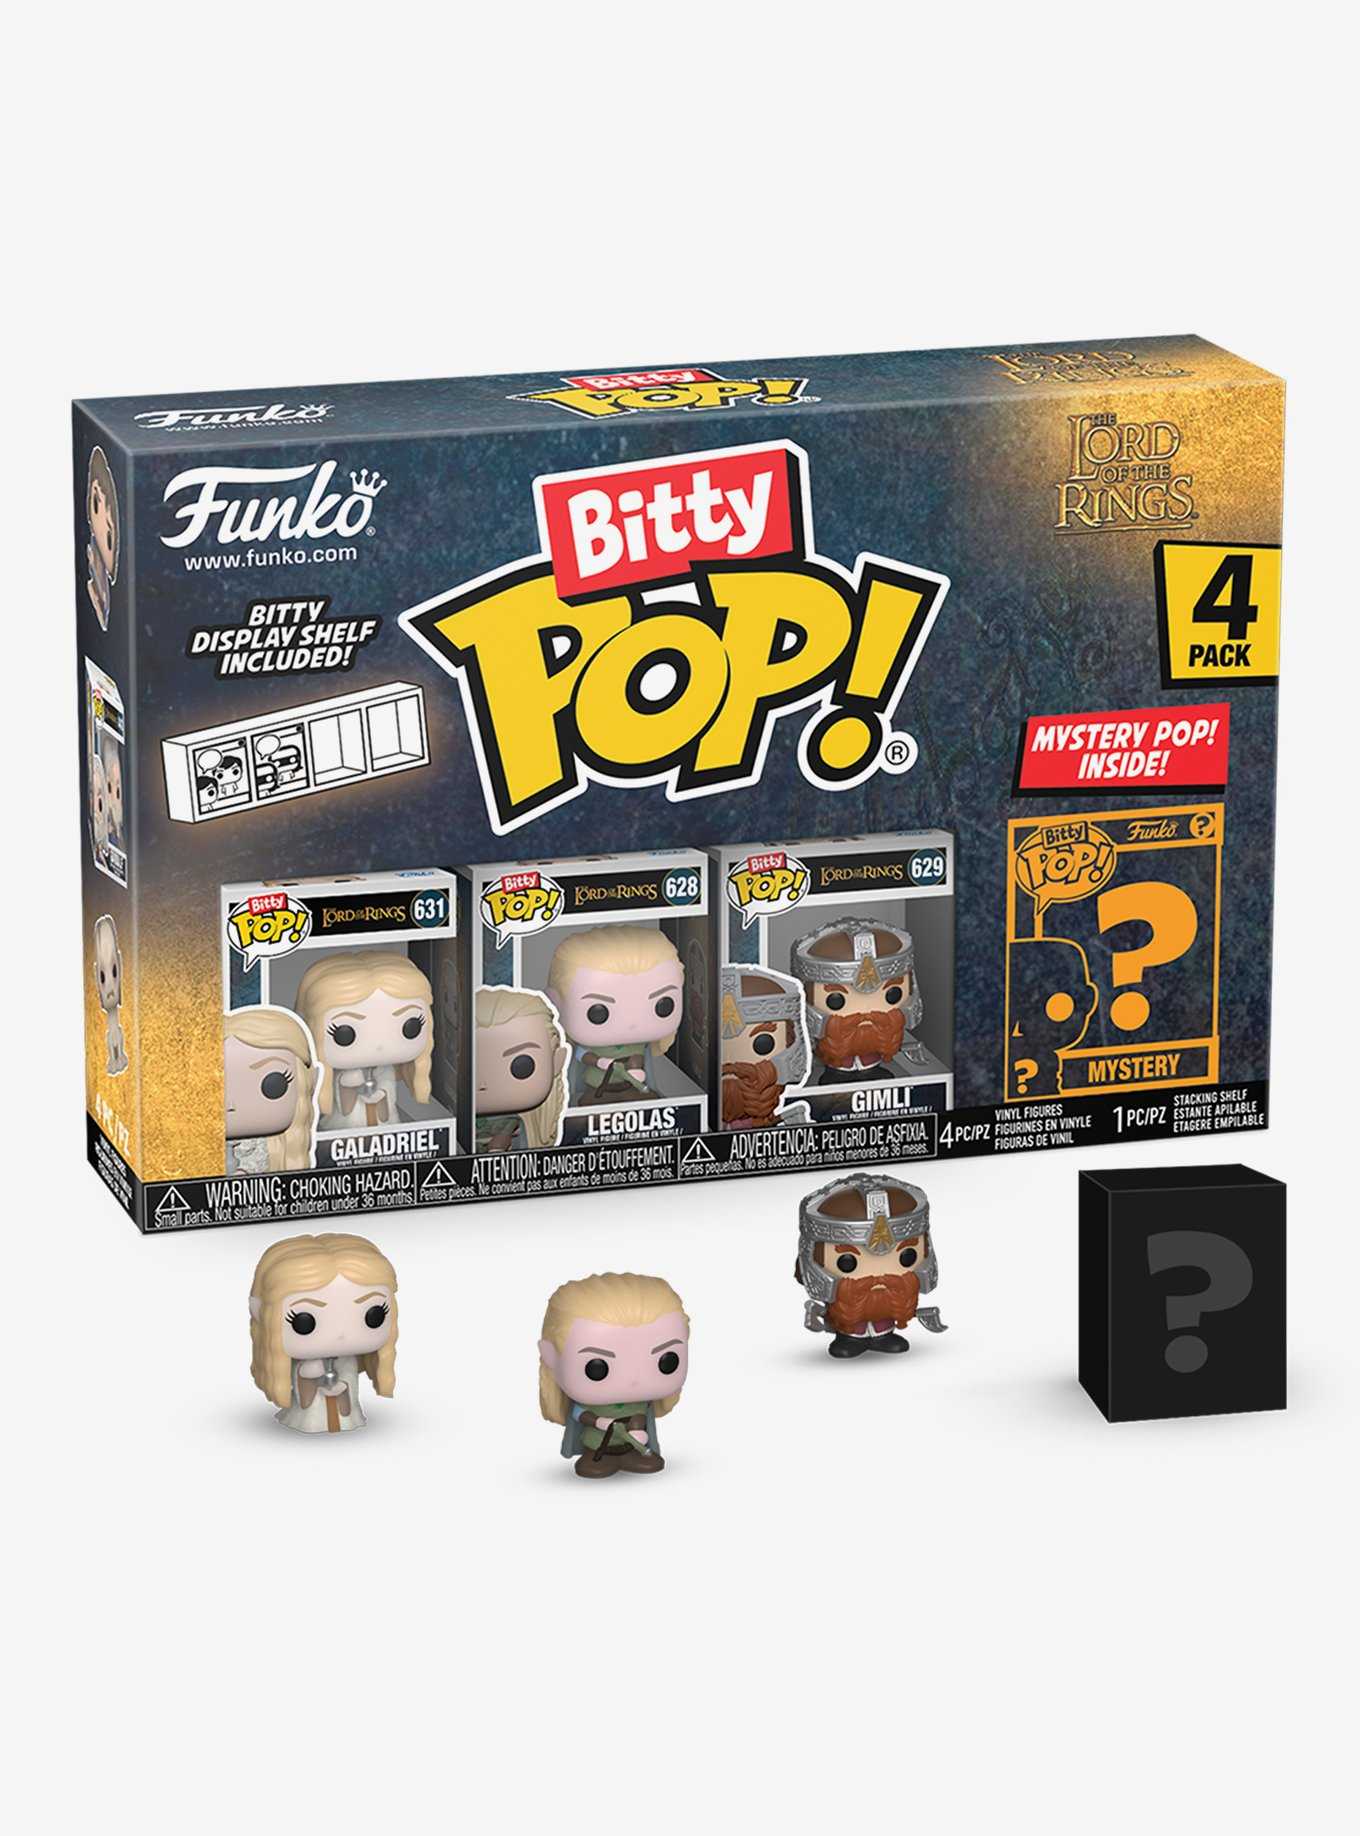 Dis Collectibles - First look at Bitty Pops and Sodas! Coming soon. .  Credit Twitter u/azalben #Funko #FunkoPop #FunkoPopVinyl #Pop #PopVinyl  #Collectibles #Collectible #DisTrackers